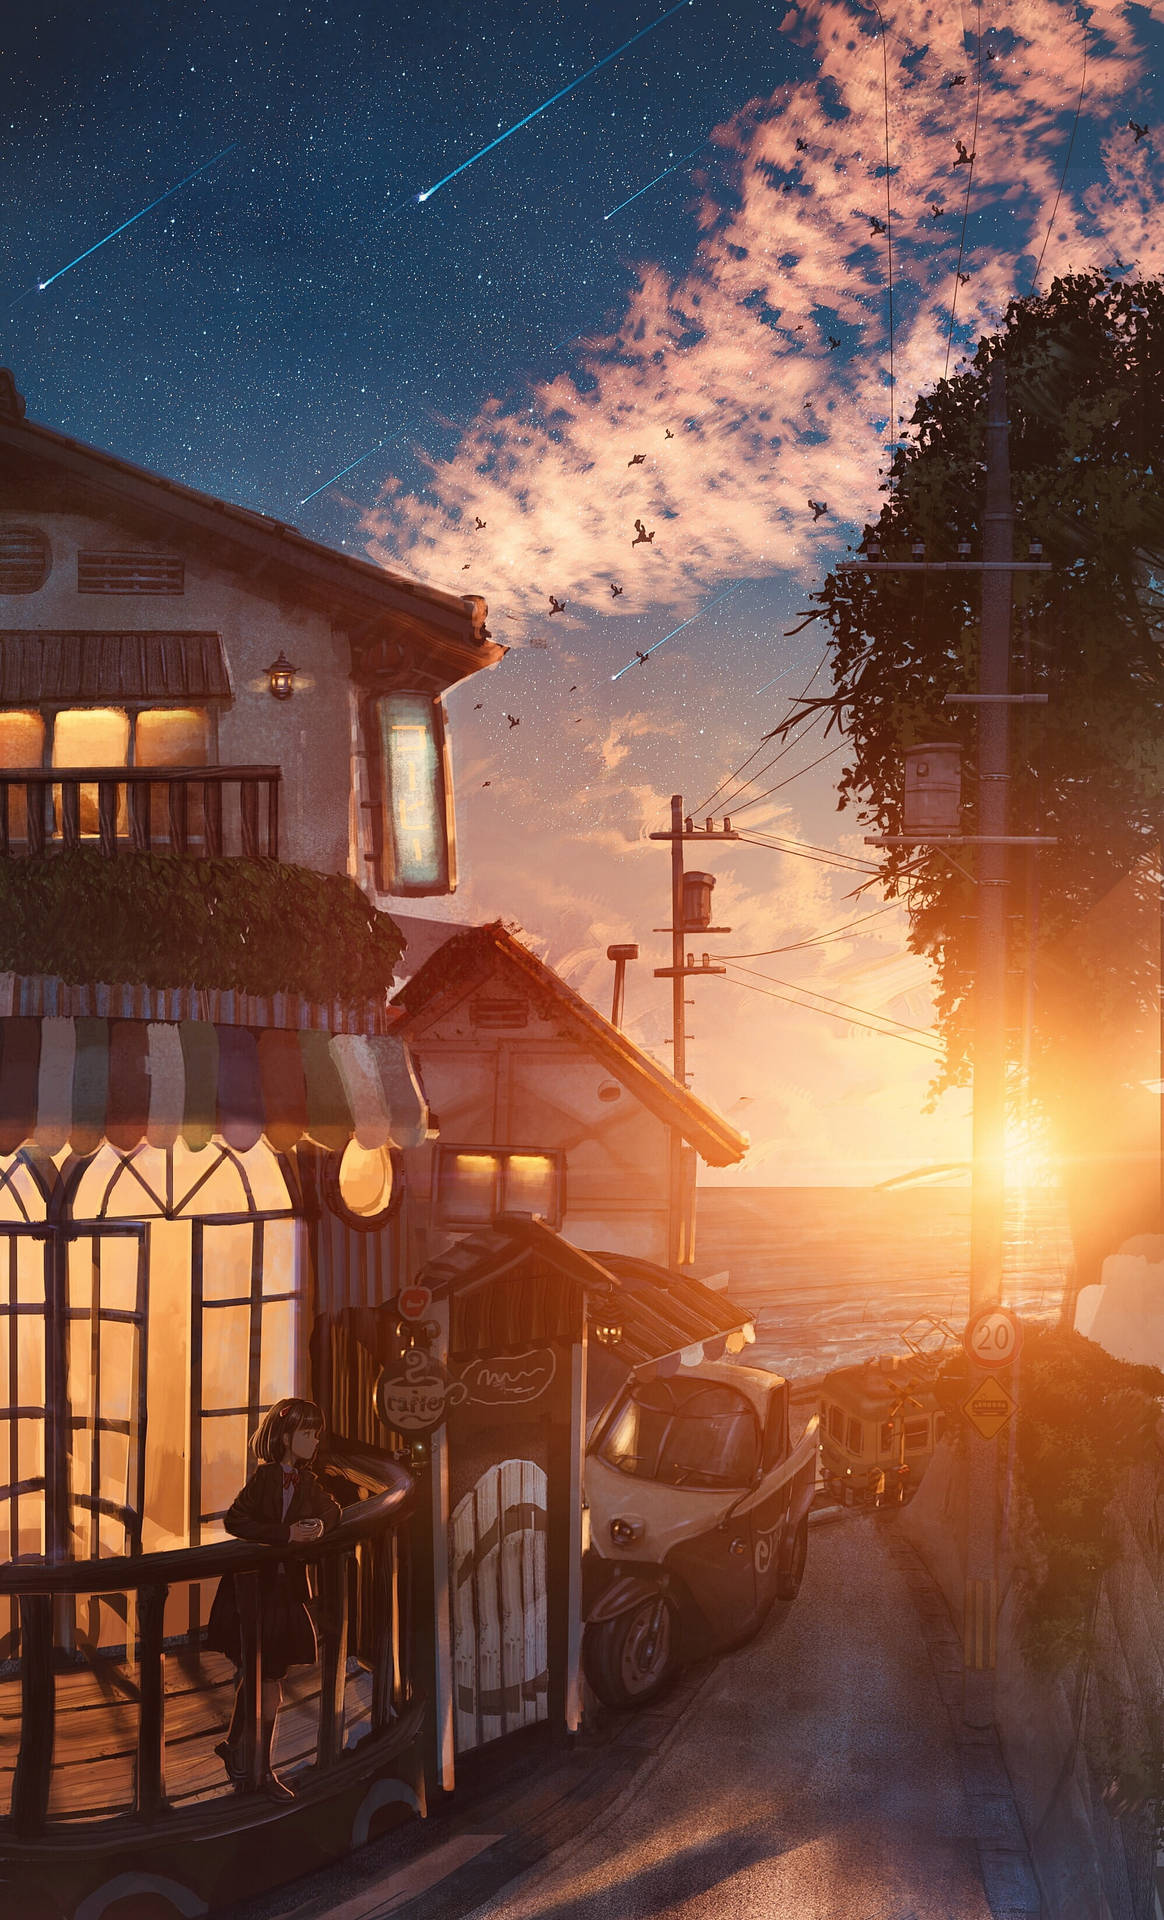 Golden Hour Over Cafe Aesthetic Anime Scenery Background